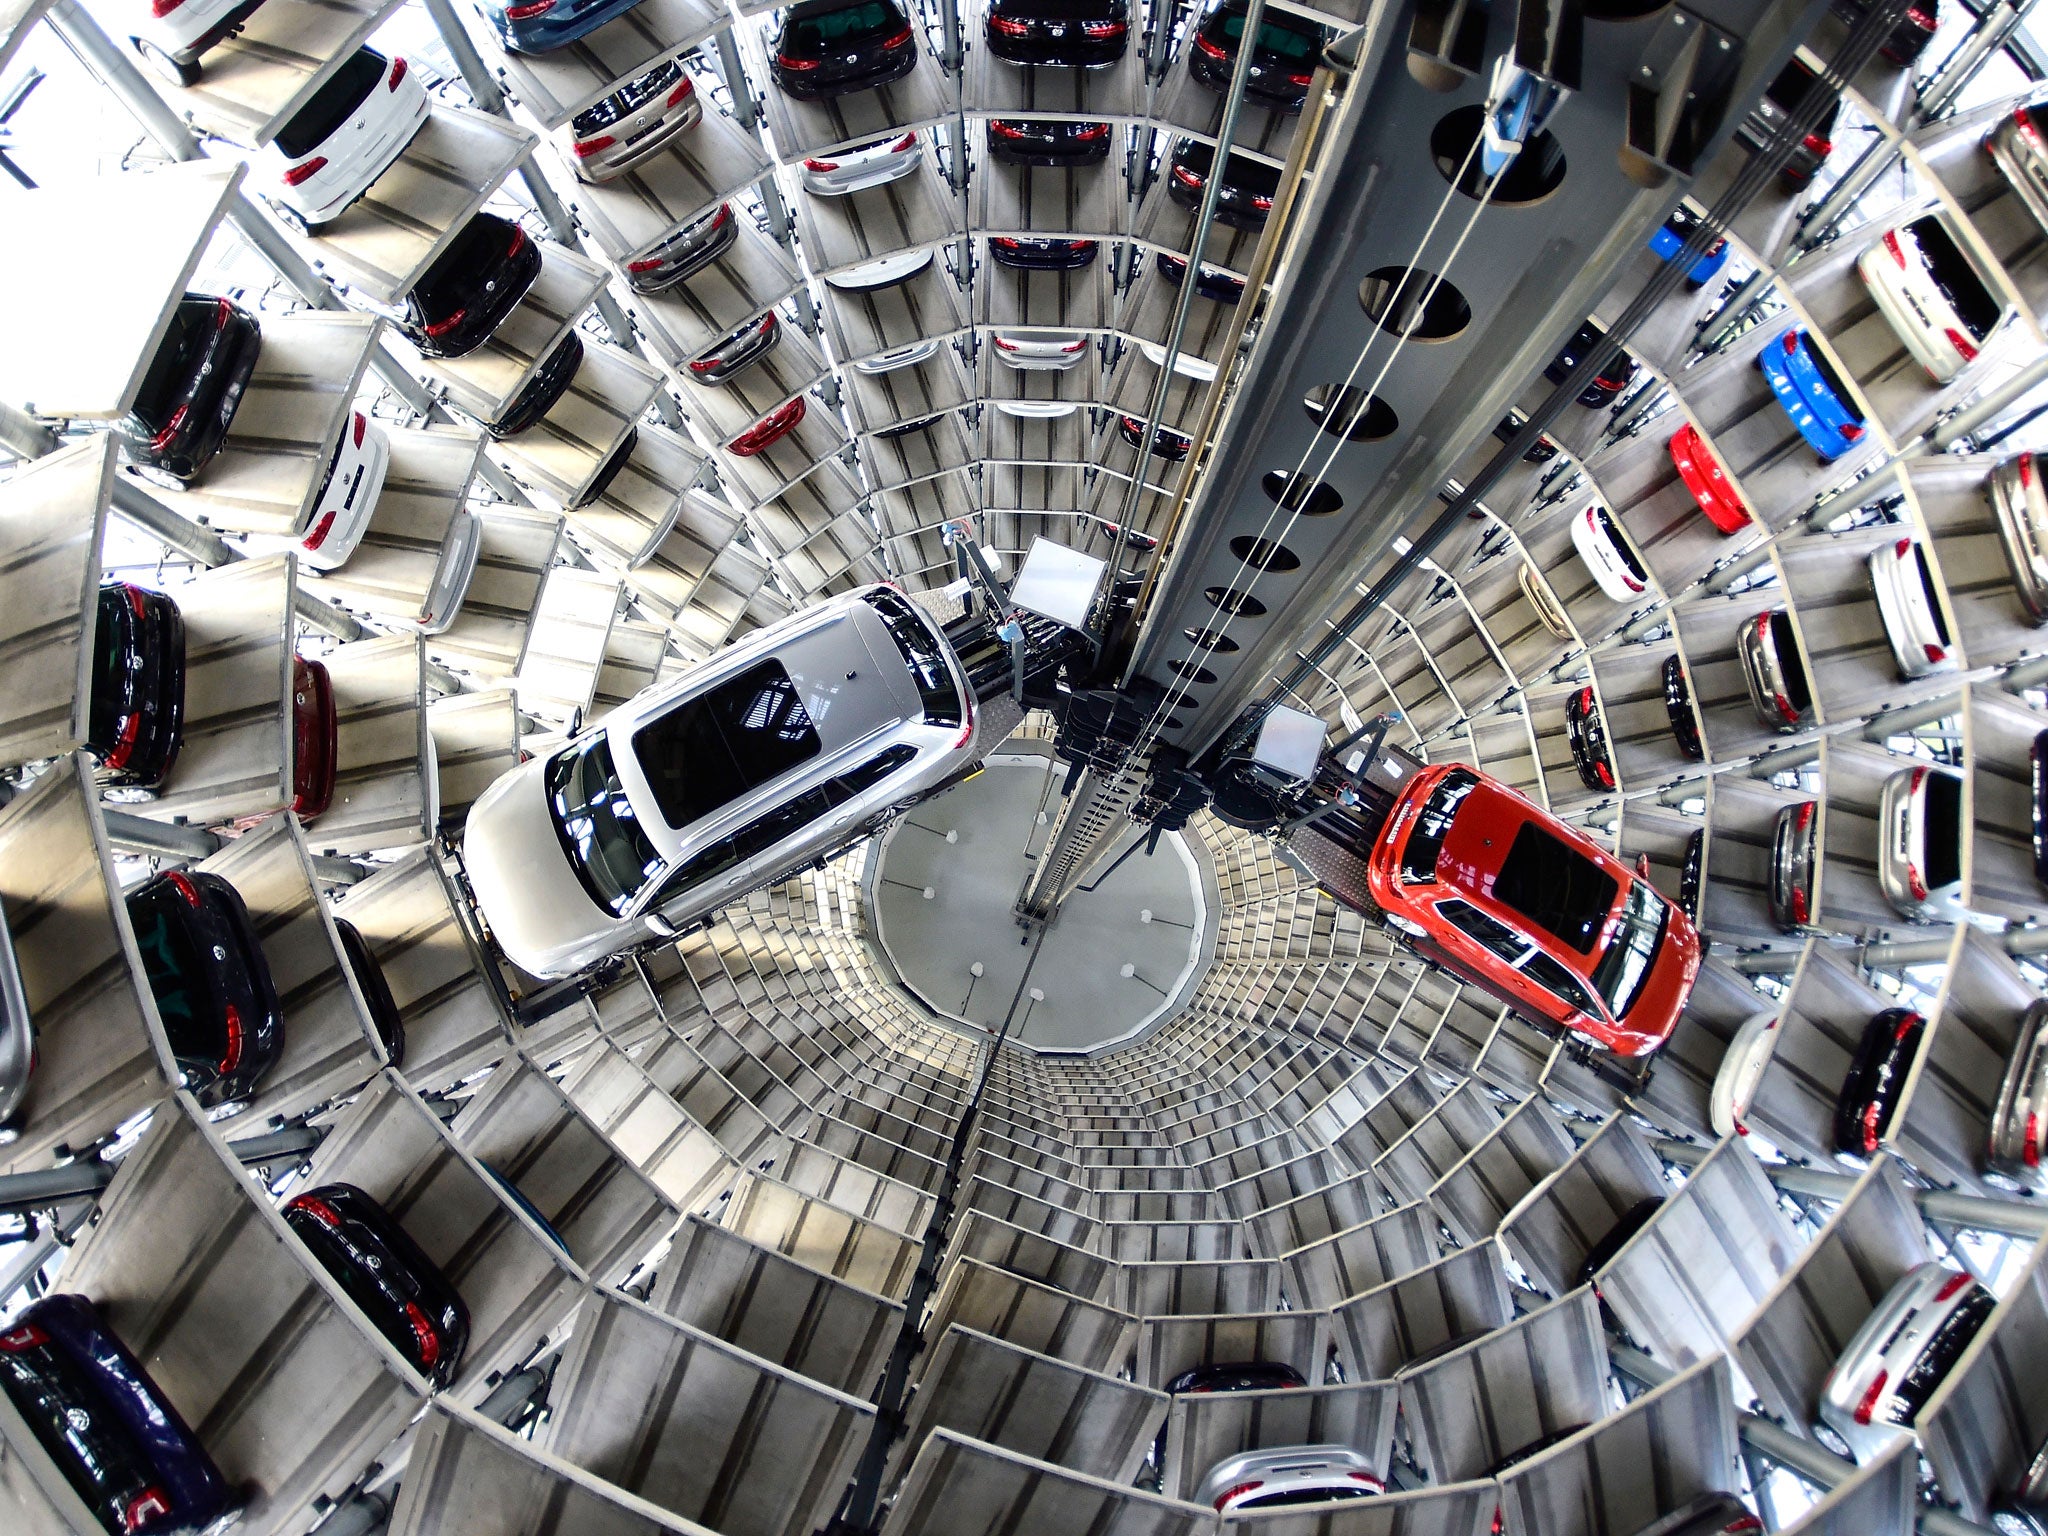 Around 1.1m Volkswagen vehicles were found to contain software that rigged emissions tests